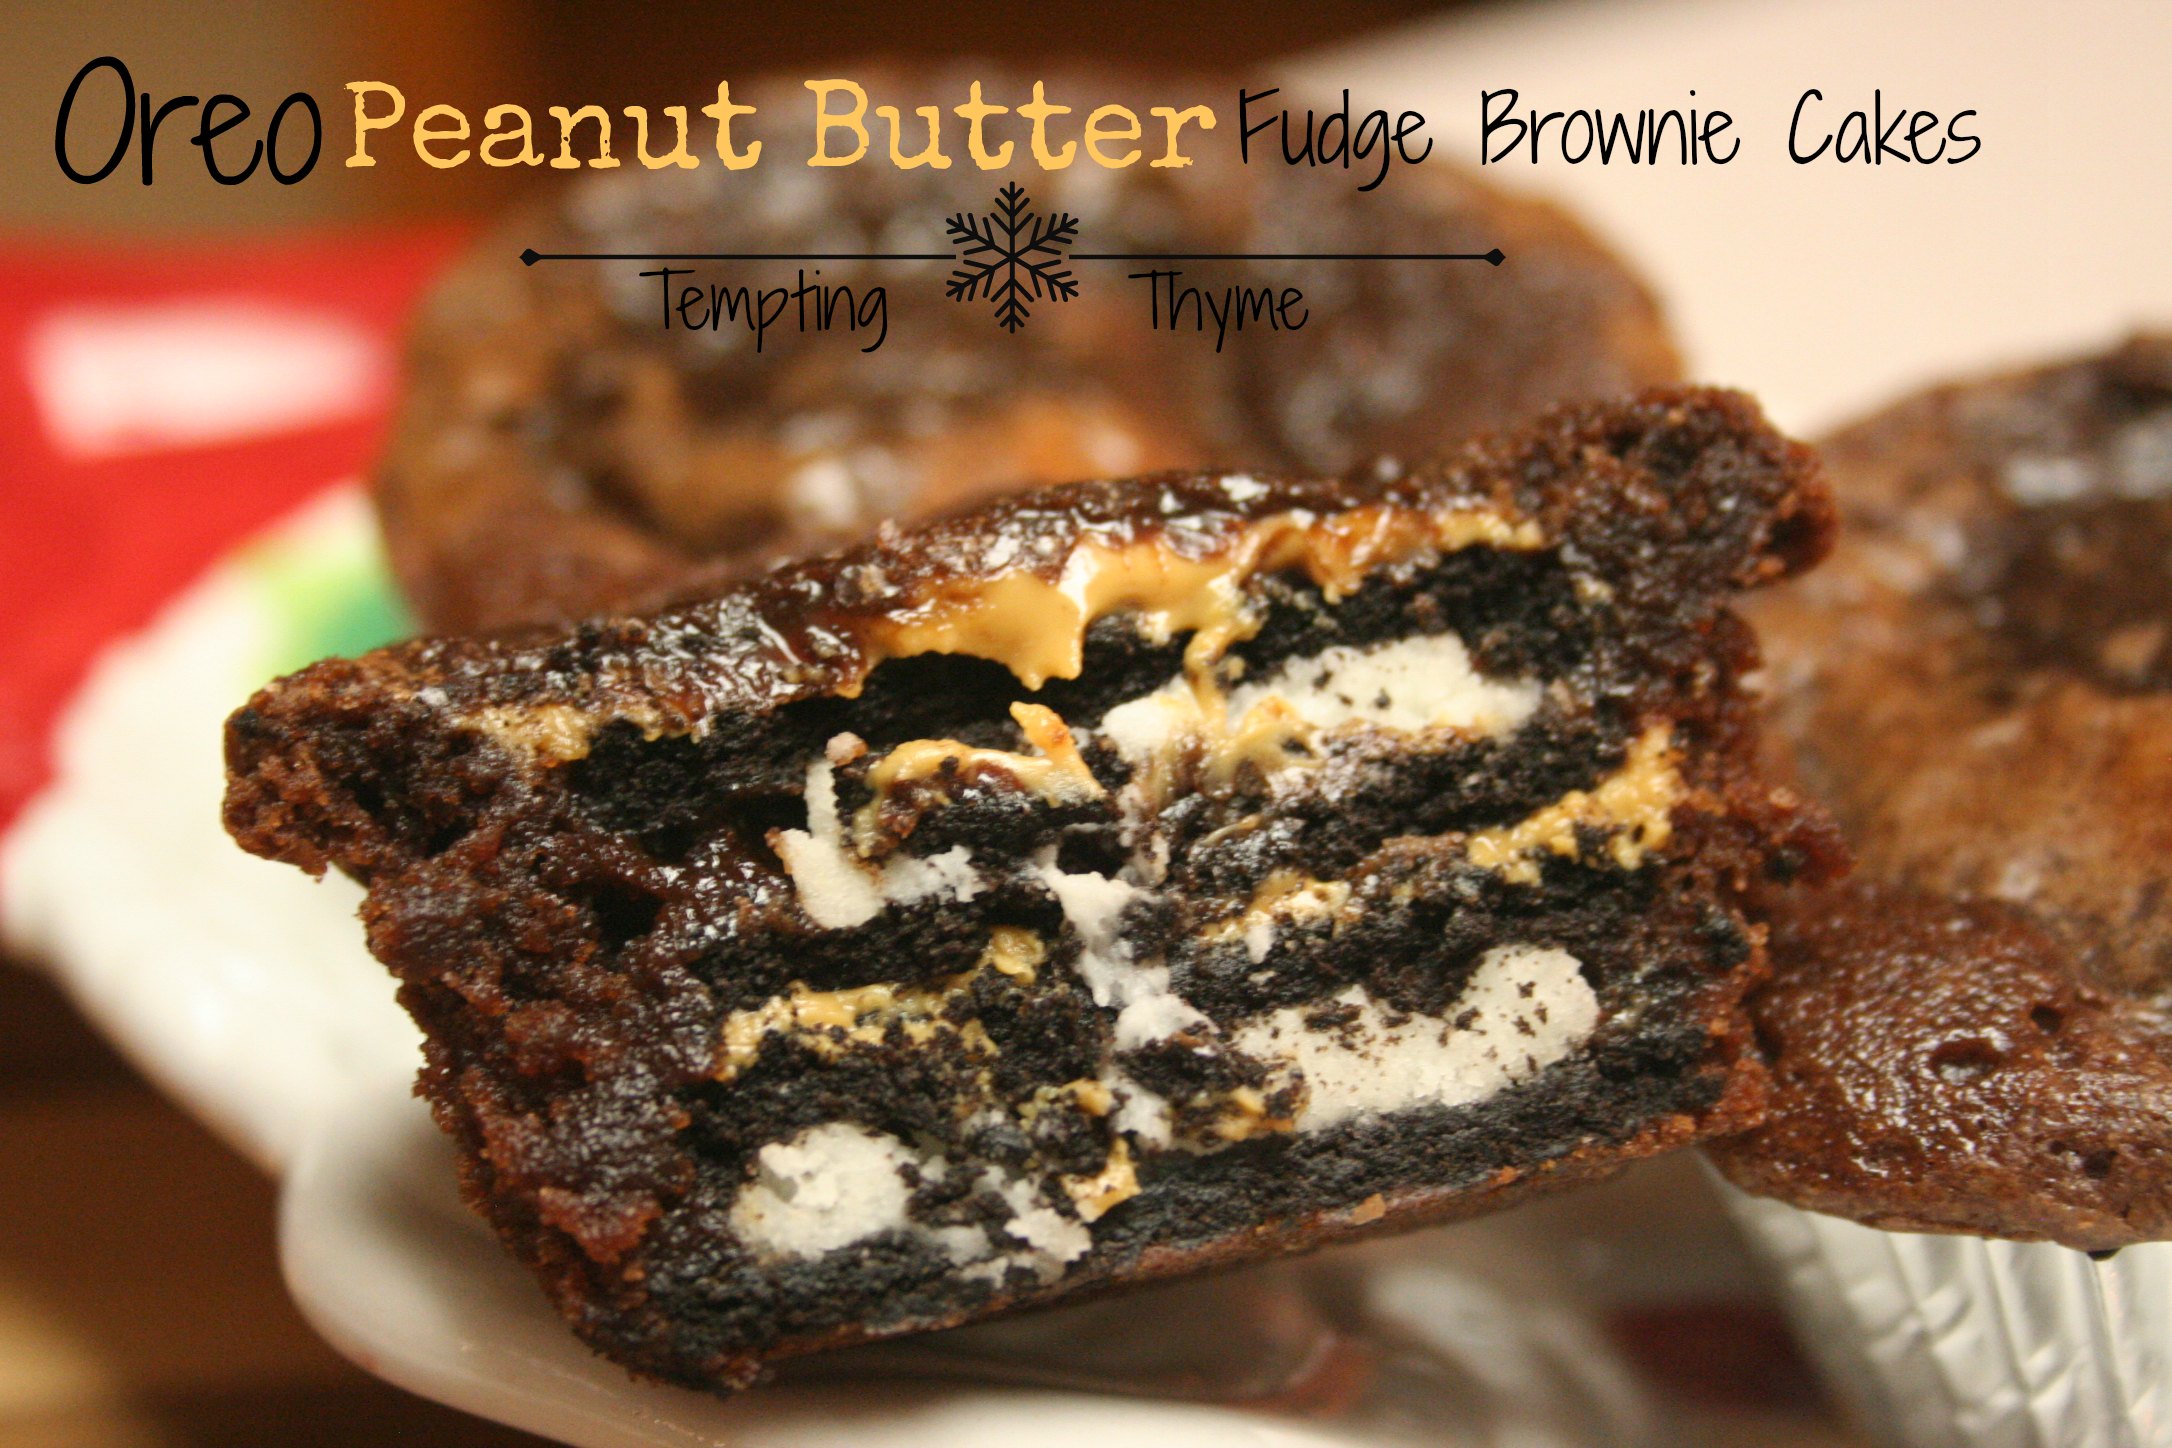 Tempting Thyme Oreo Peanut Butter Fudgy Brownie Cakes